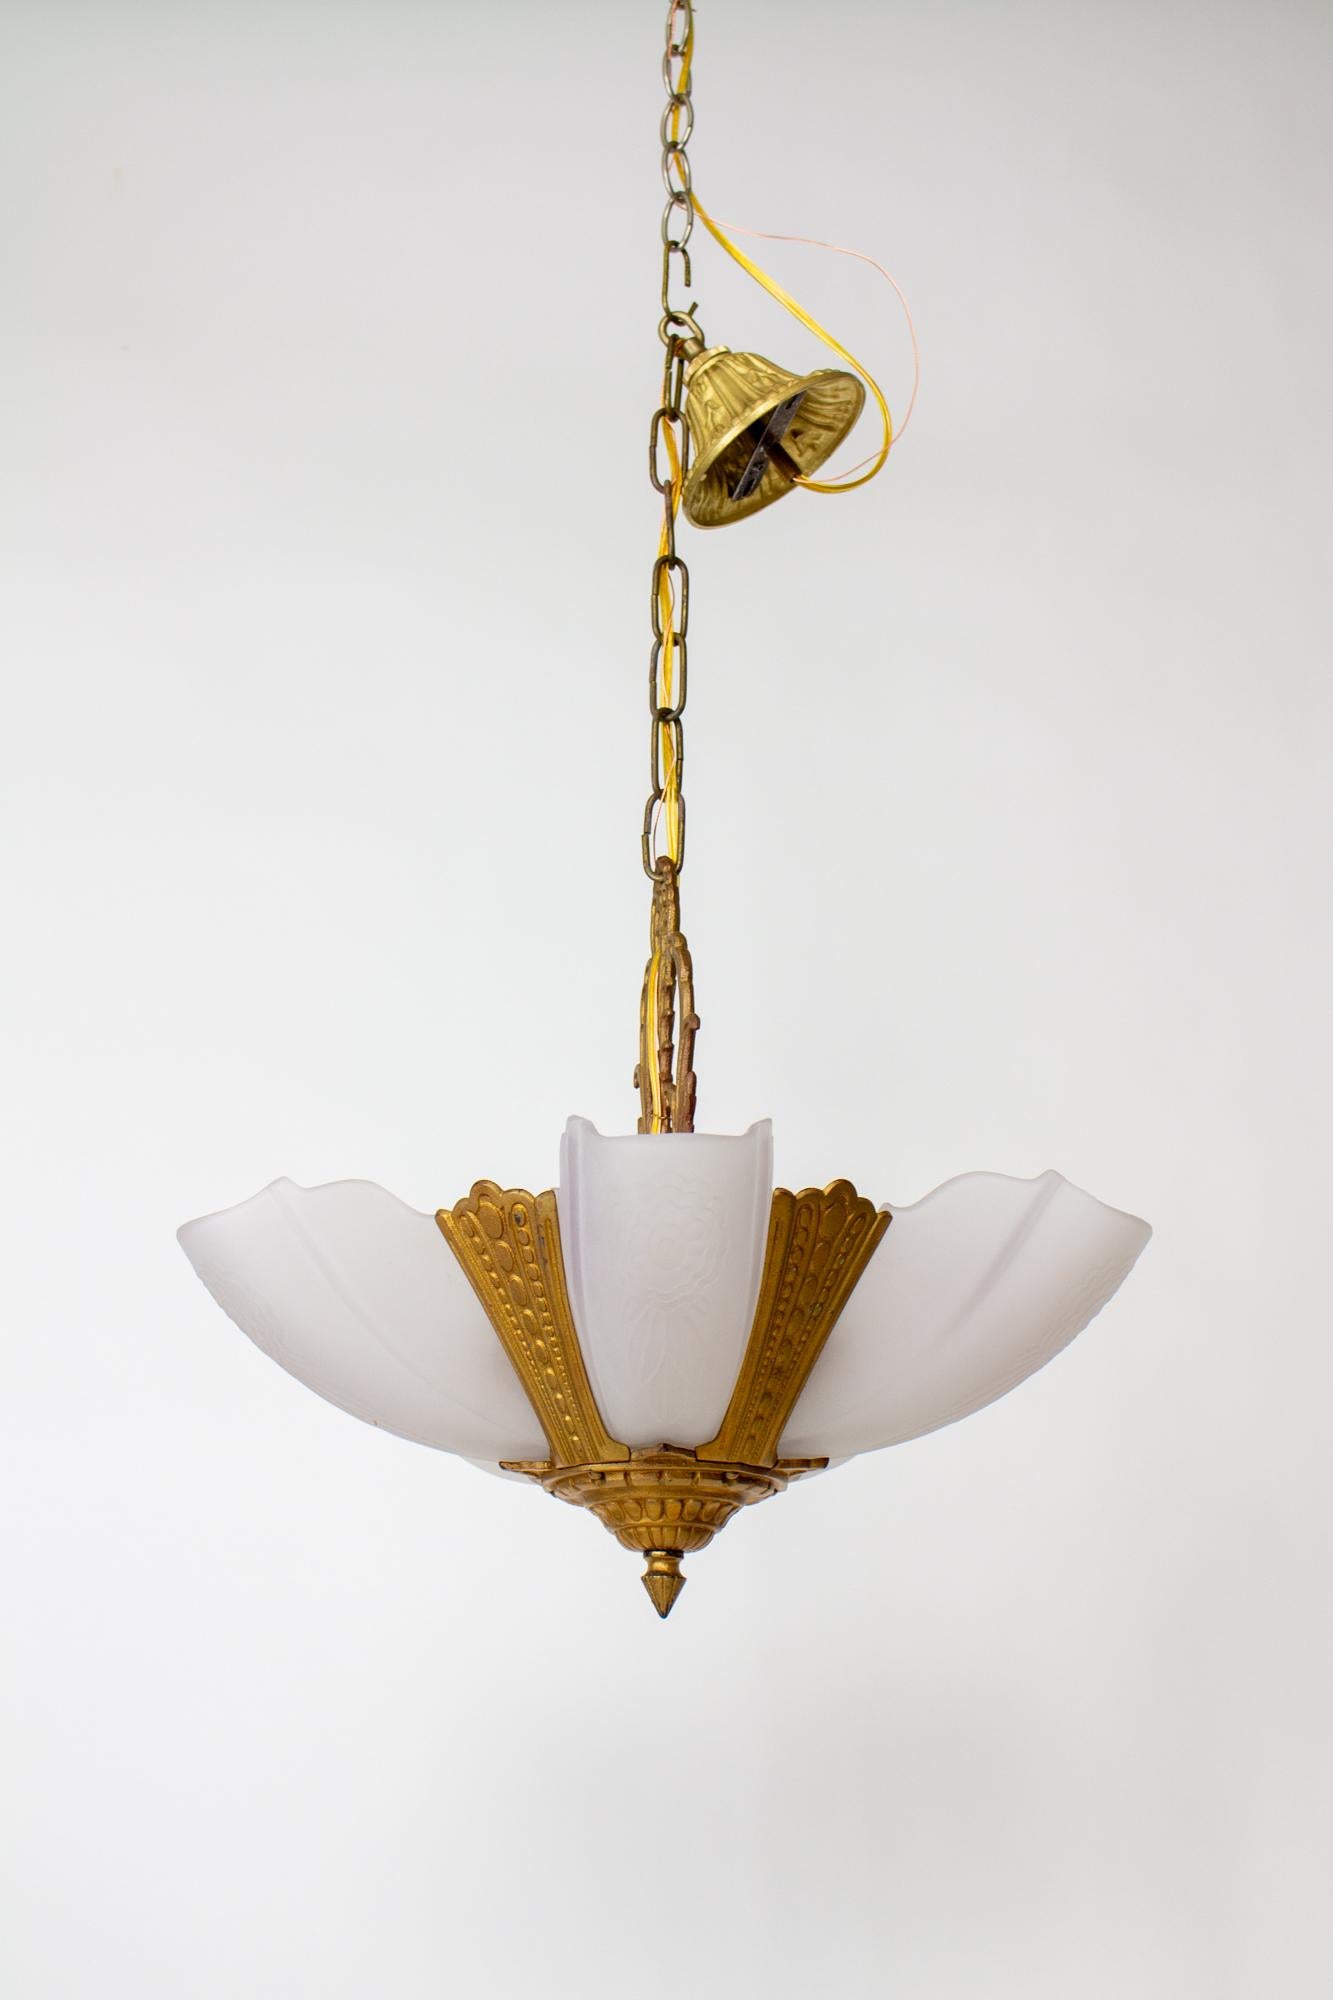 An authentic 1930's Gold Art Deco Slip Shade Chandelier. This chandelier embodies the essence of the Art Deco era, characterized by its sleek lines, geometric shapes, and simple finishes. The cast iron body of this chandelier boasts its original